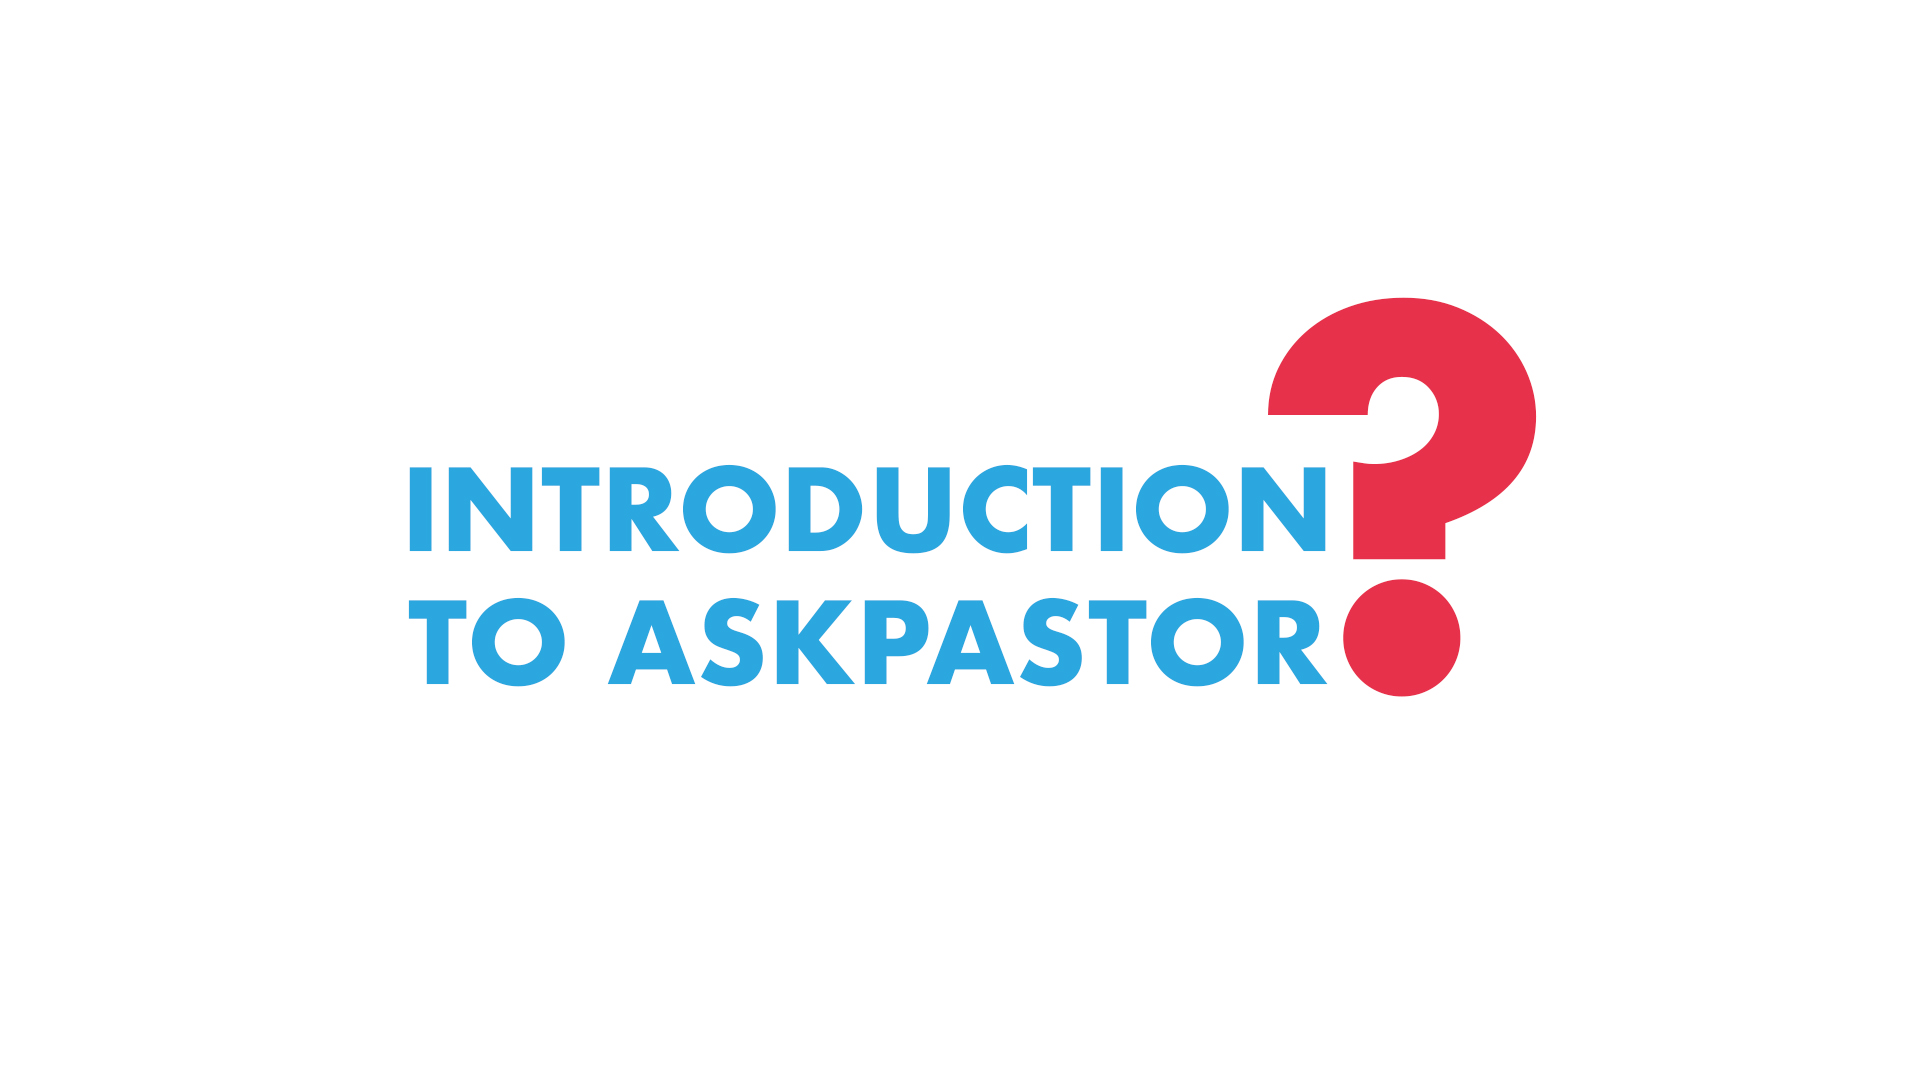 Introduction to AskPastor